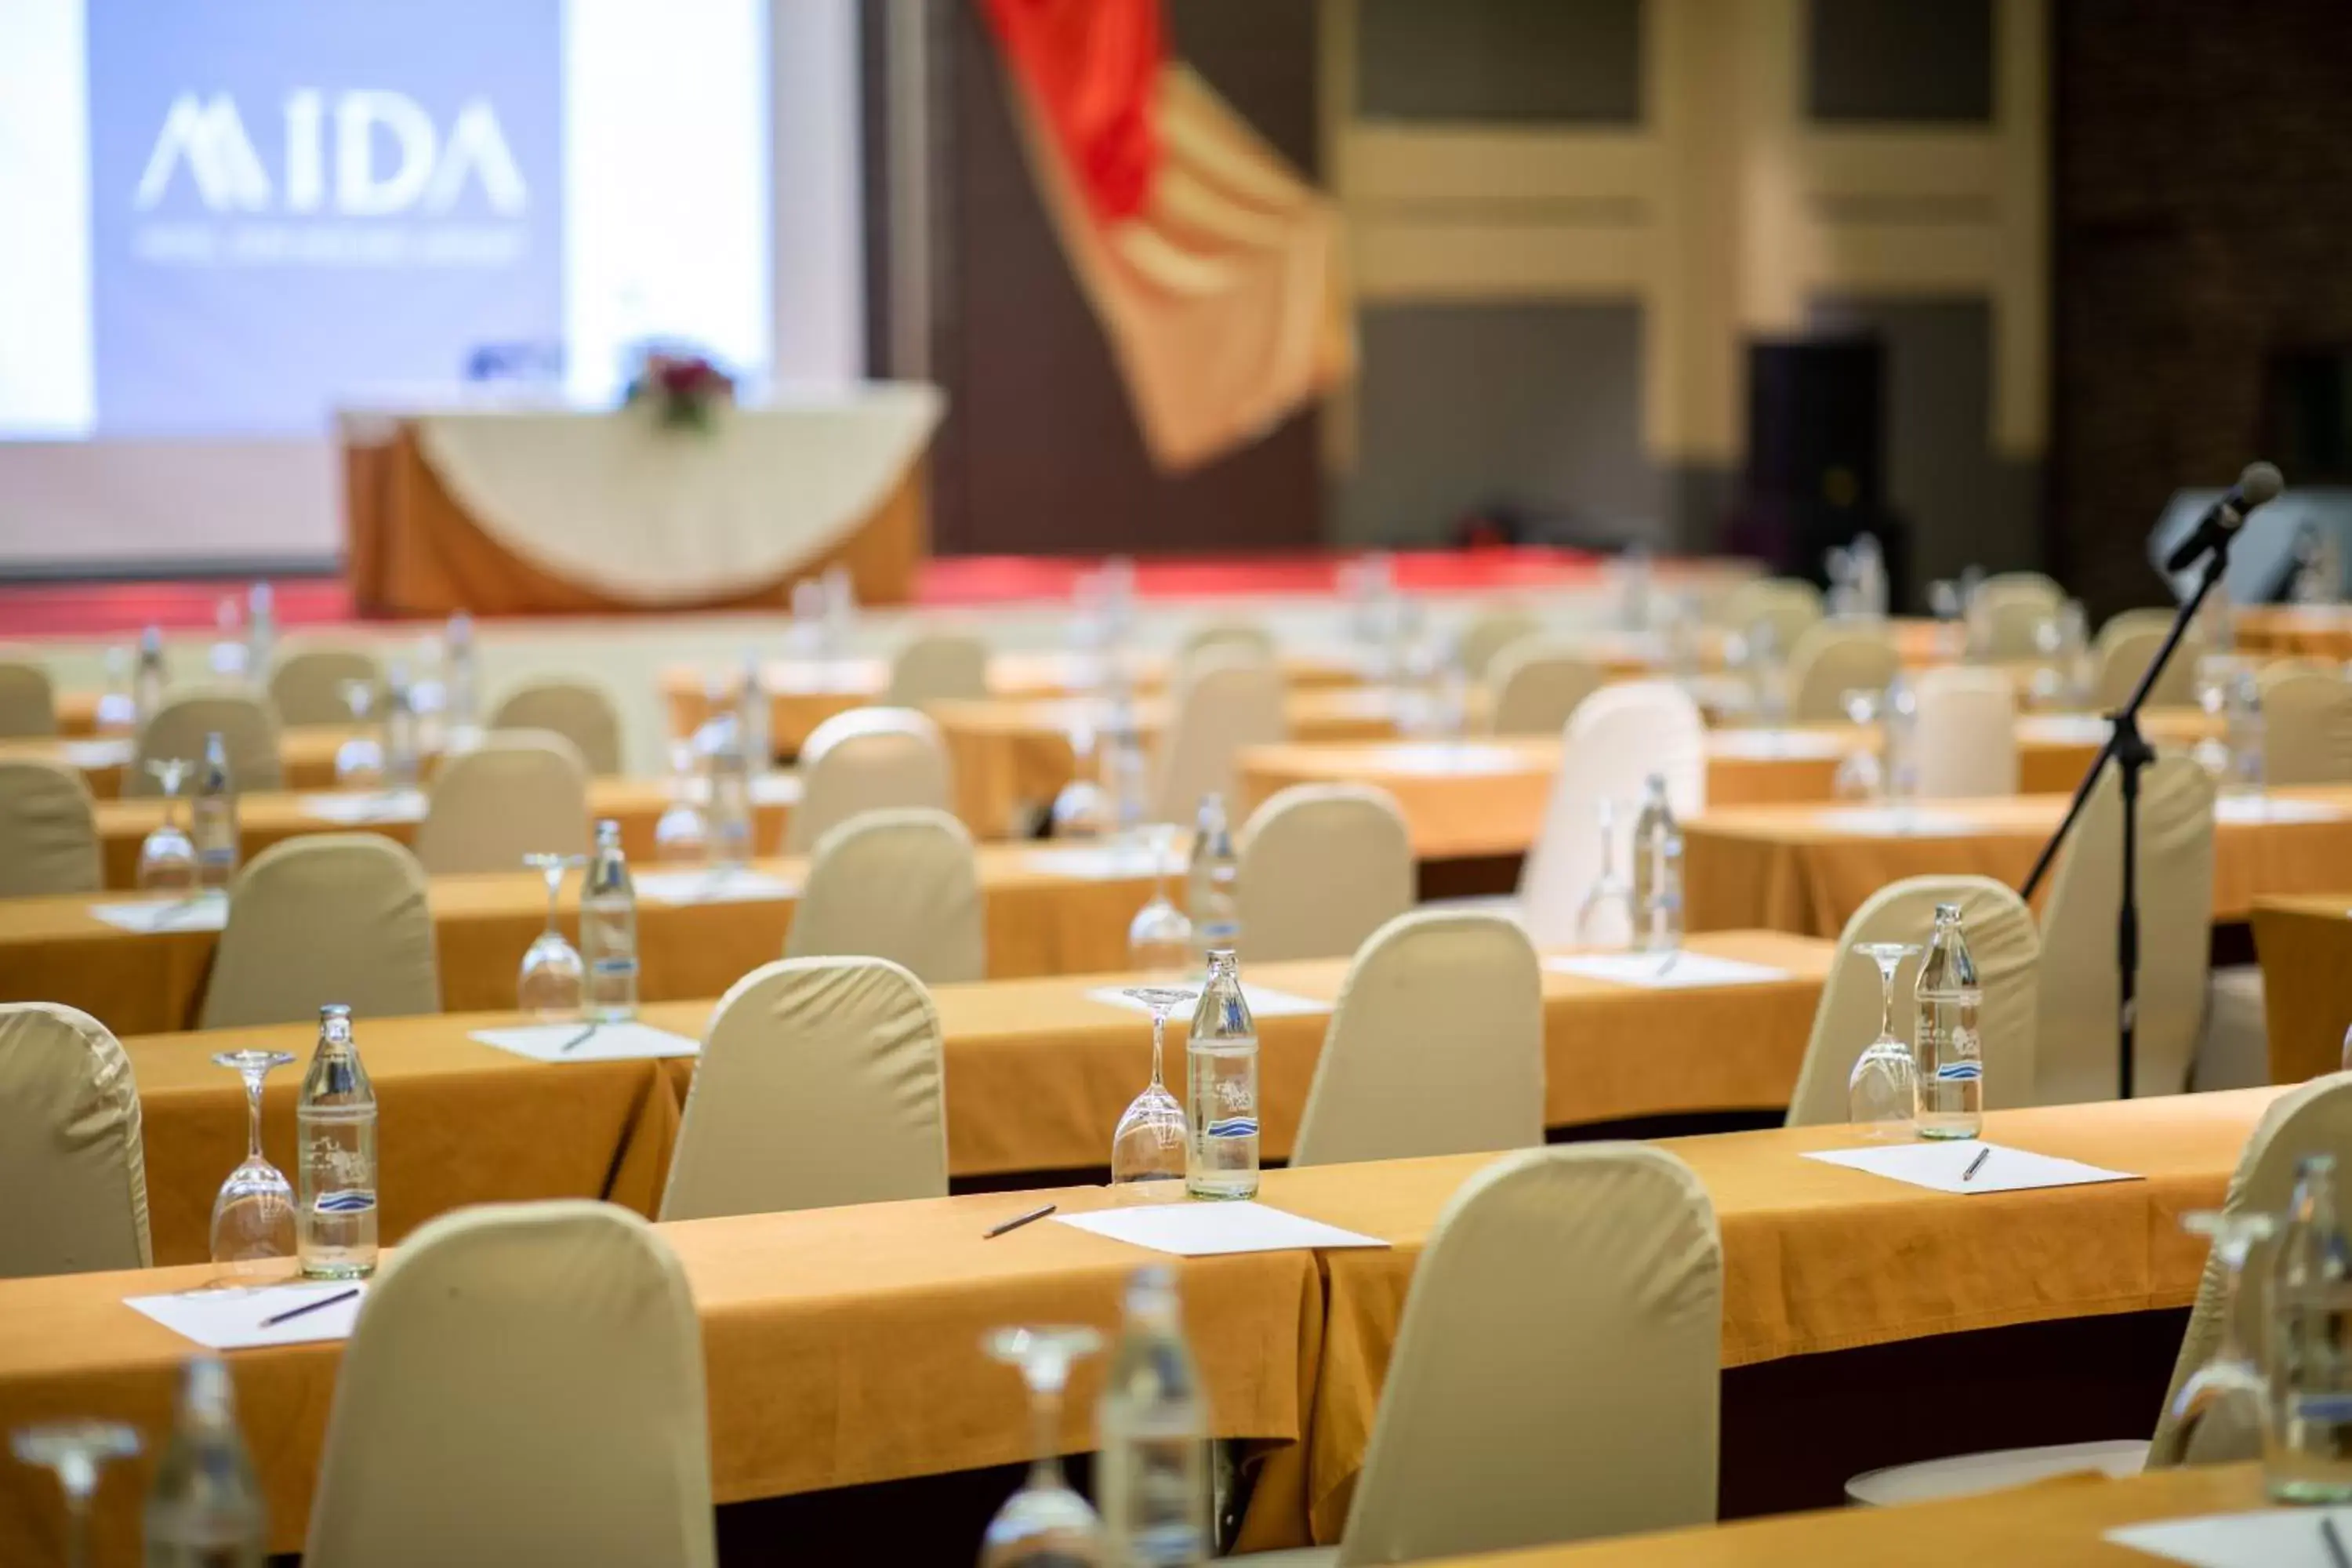 Meeting/conference room in Mida Hotel Don Mueang Airport